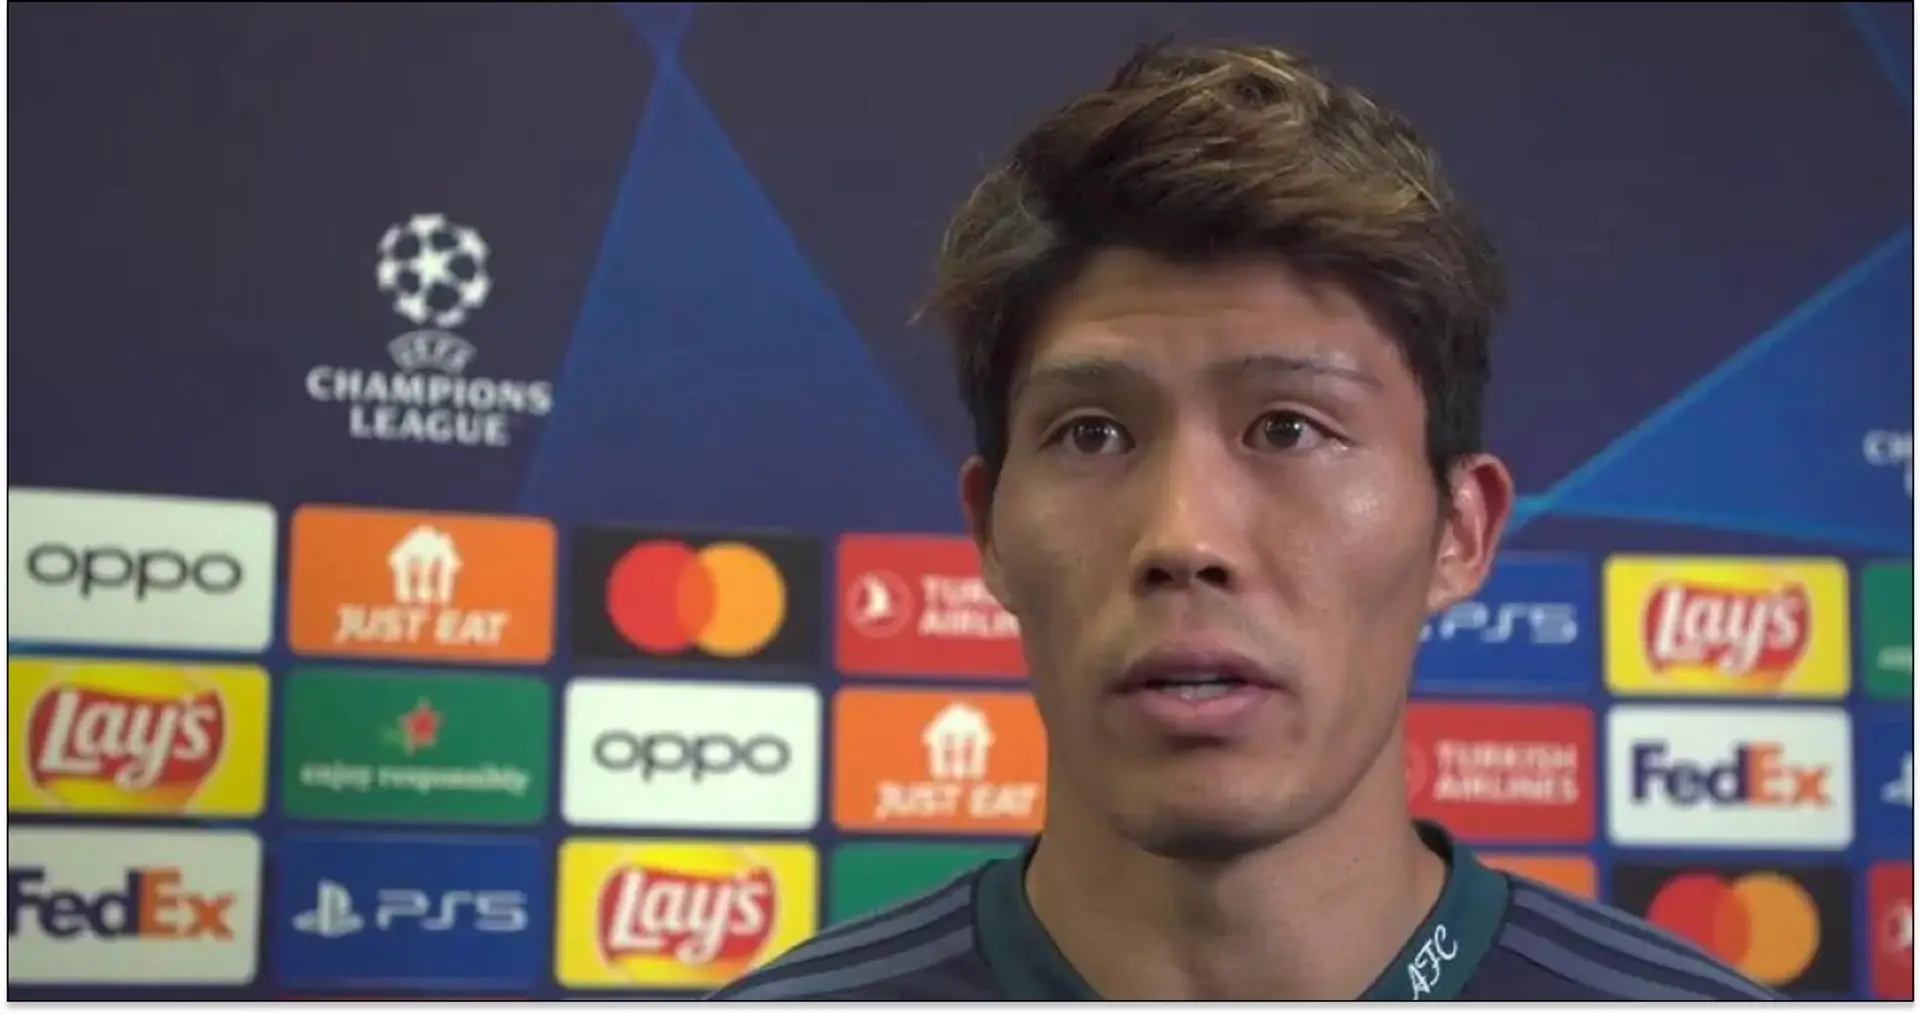 'He told me': Tomiyasu reveals what Lens keeper told him after he missed that chance